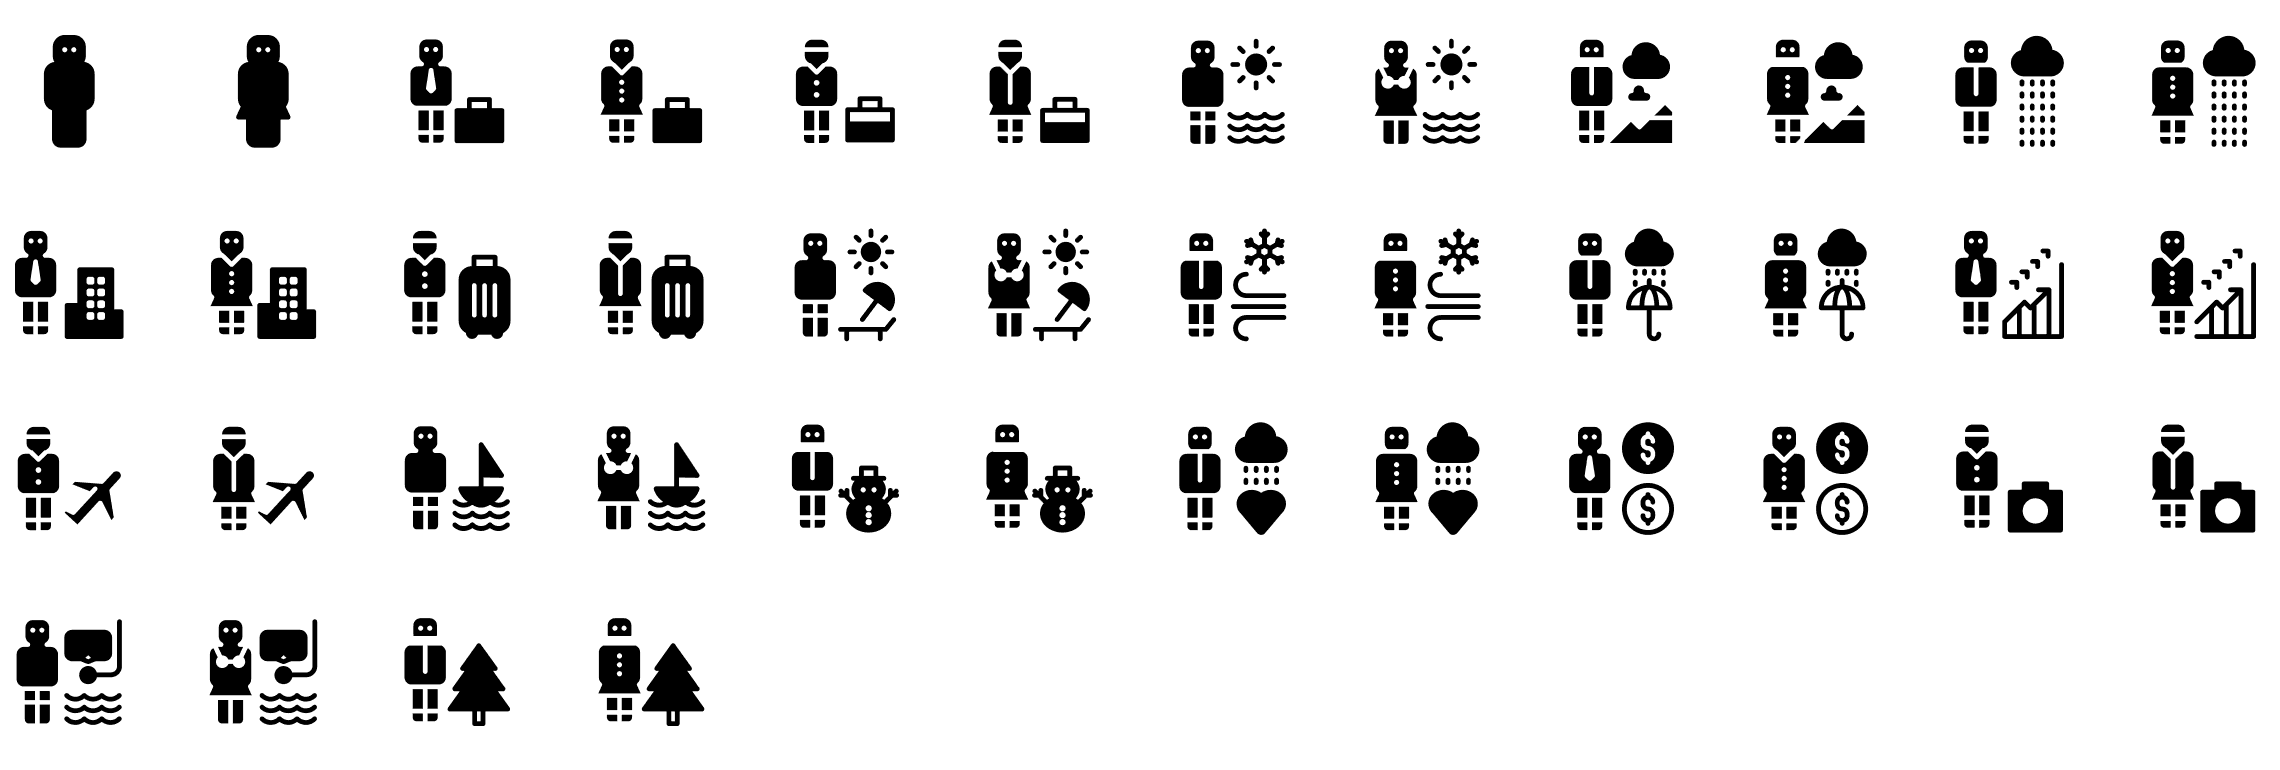 people-glyph-icons-preview